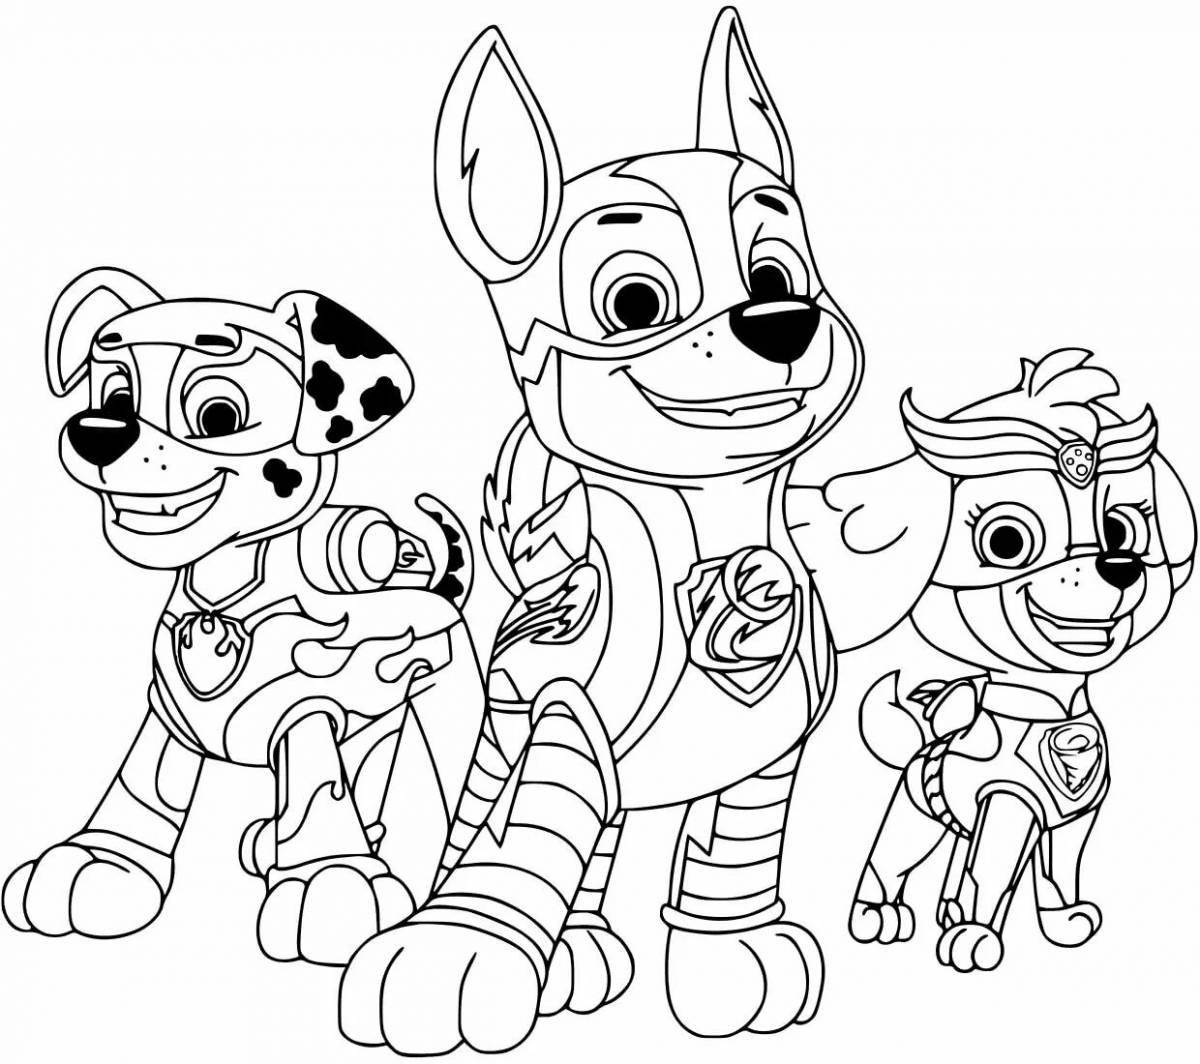 Attractive tower paw patrol coloring page